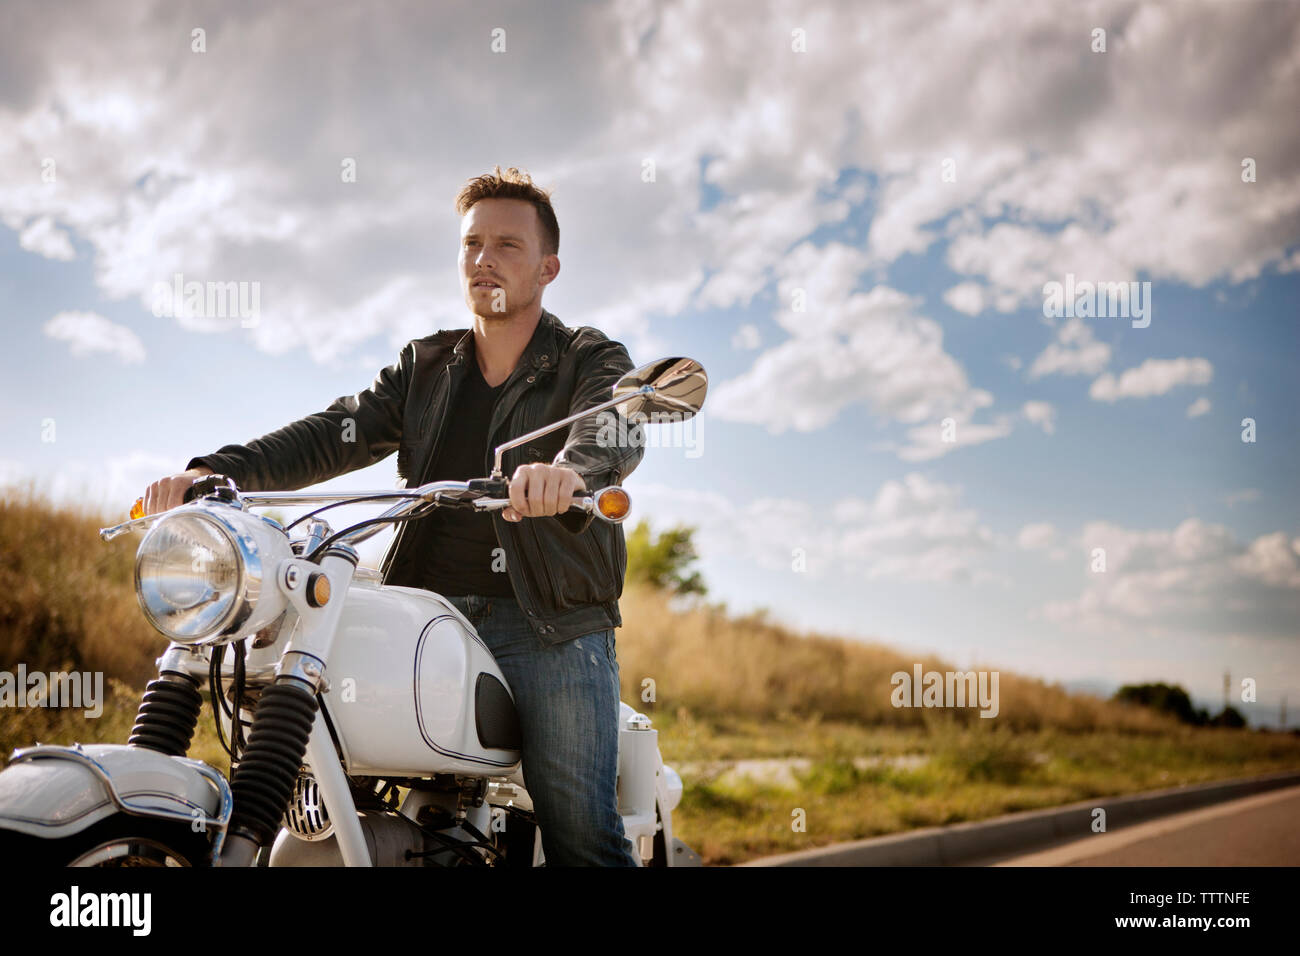 Biker riding motorcycle against cloudy sky Stock Photo